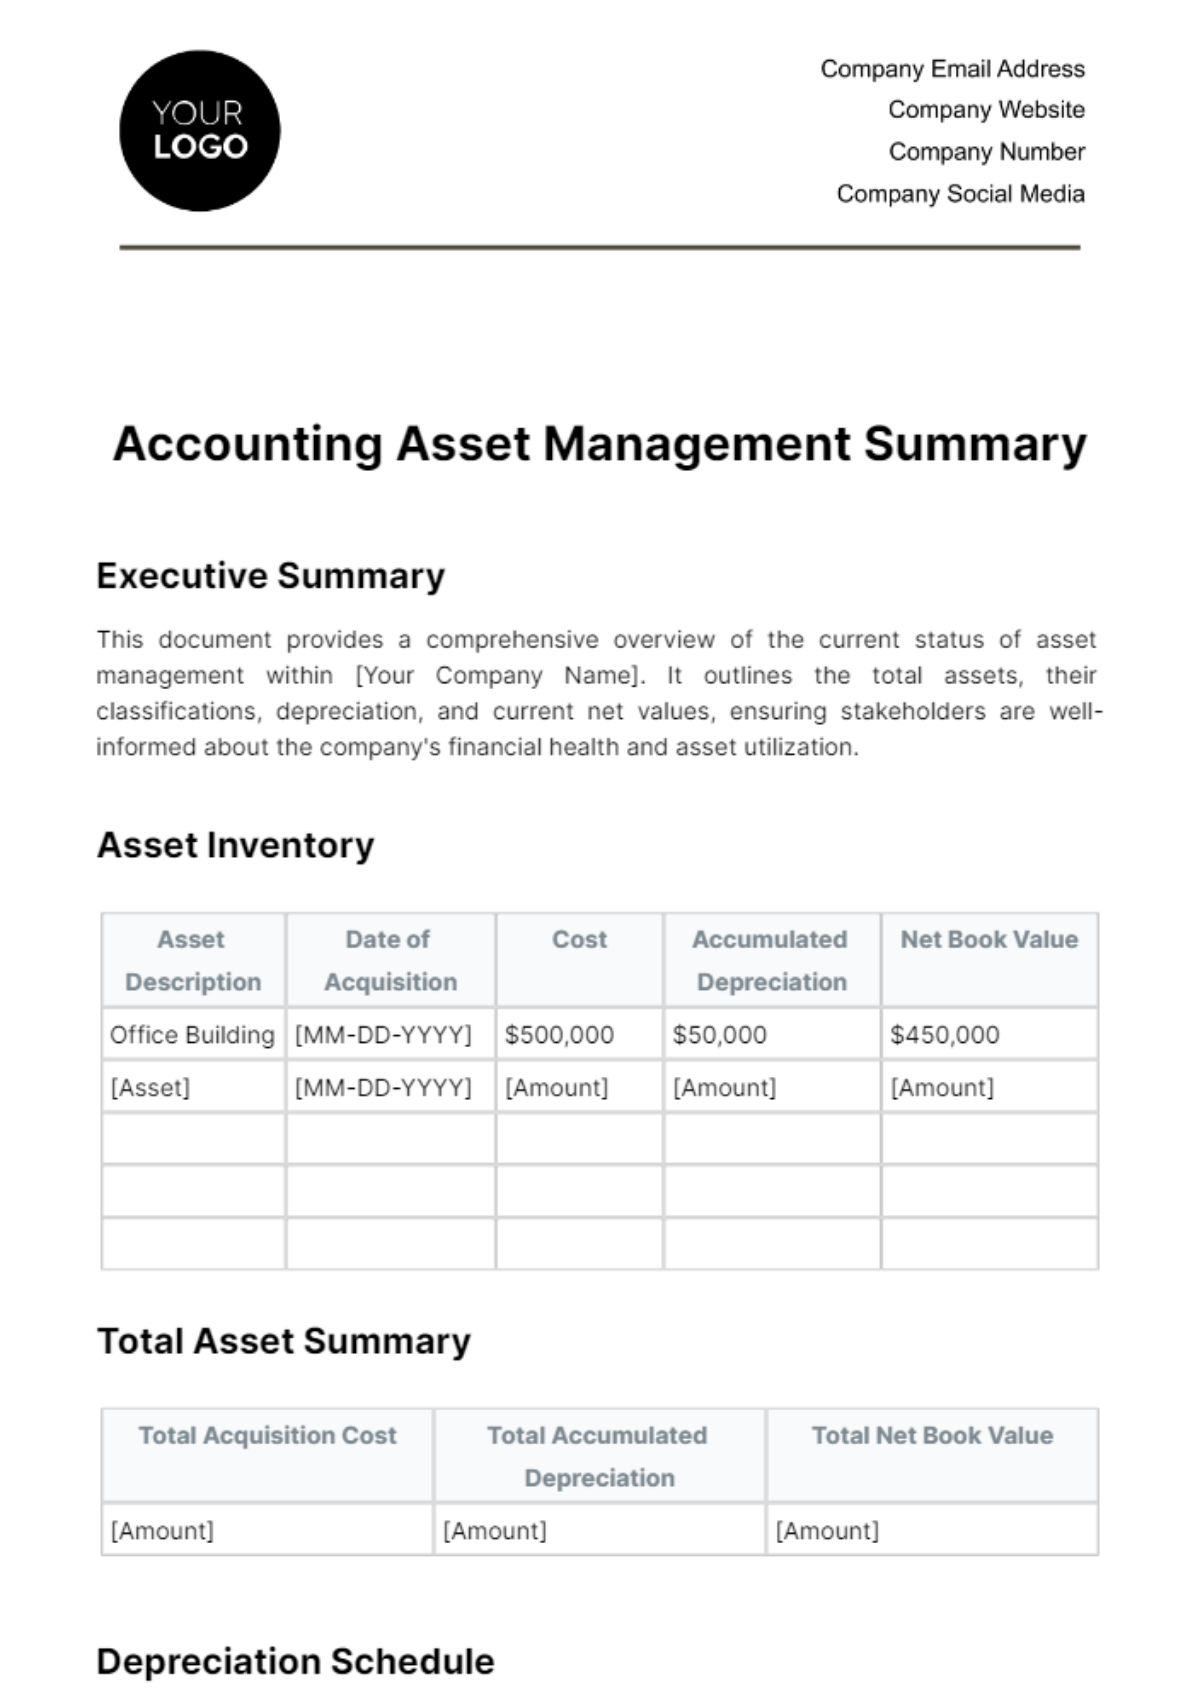 Accounting Asset Management Summary Template